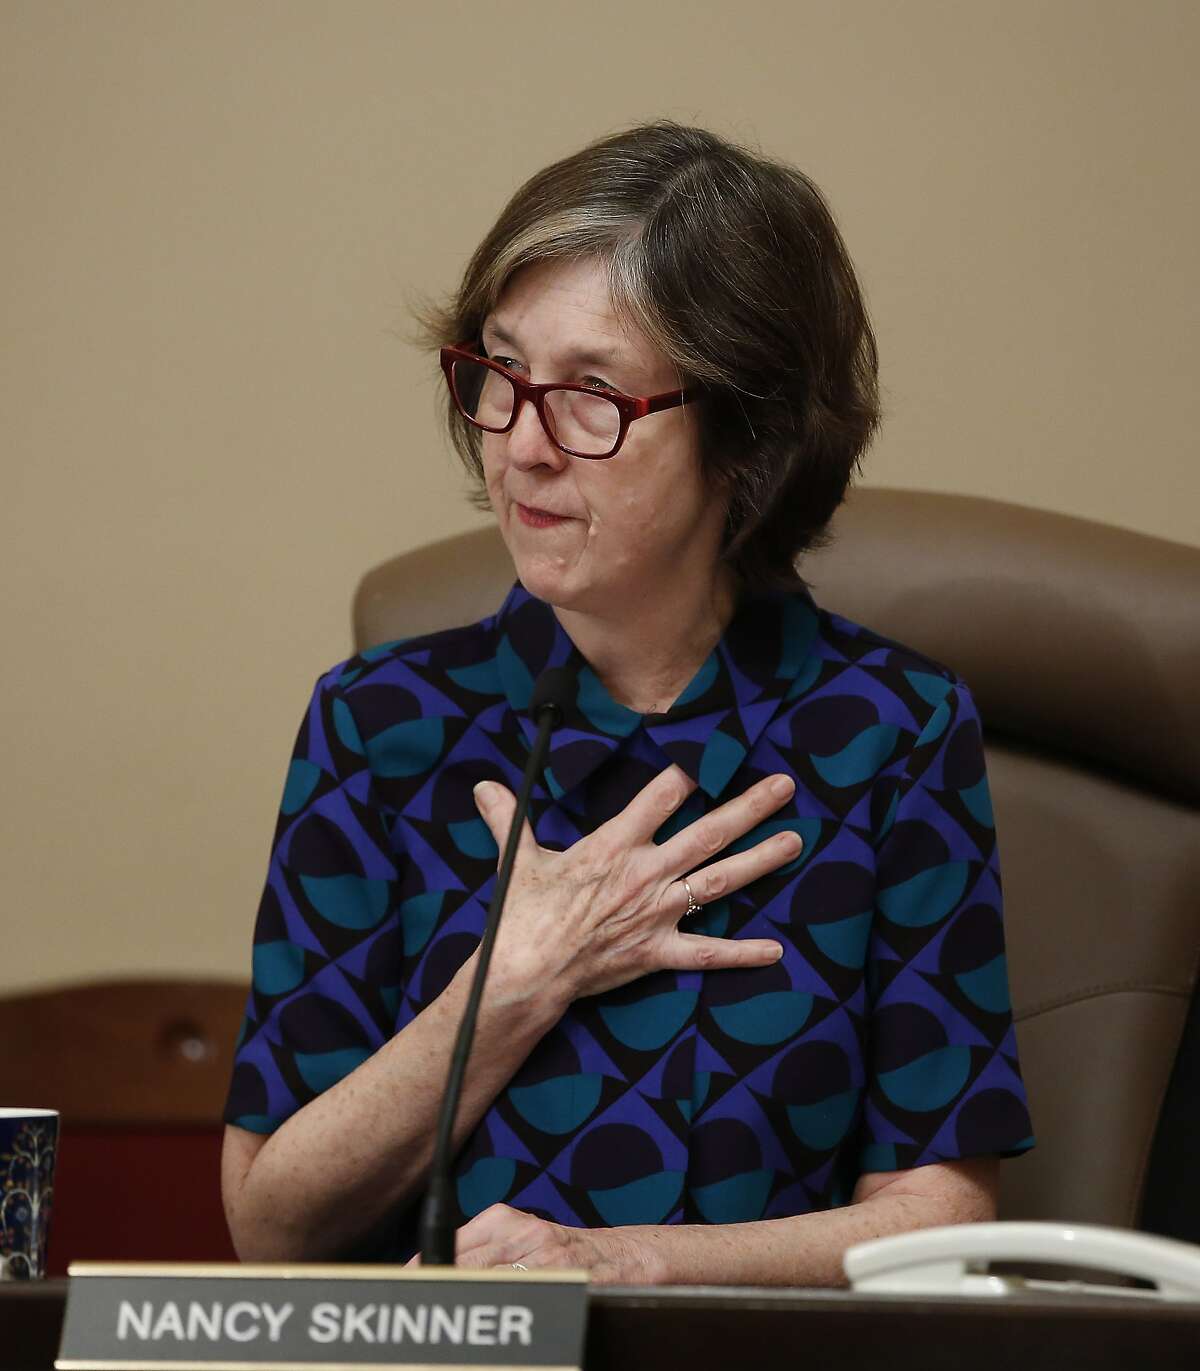 State Sen. Nancy Skinner, D-Berkeley, is the author of SB1421, a landmark police transparency bill. Six months after the law began, many police departments have not complied with its terms.